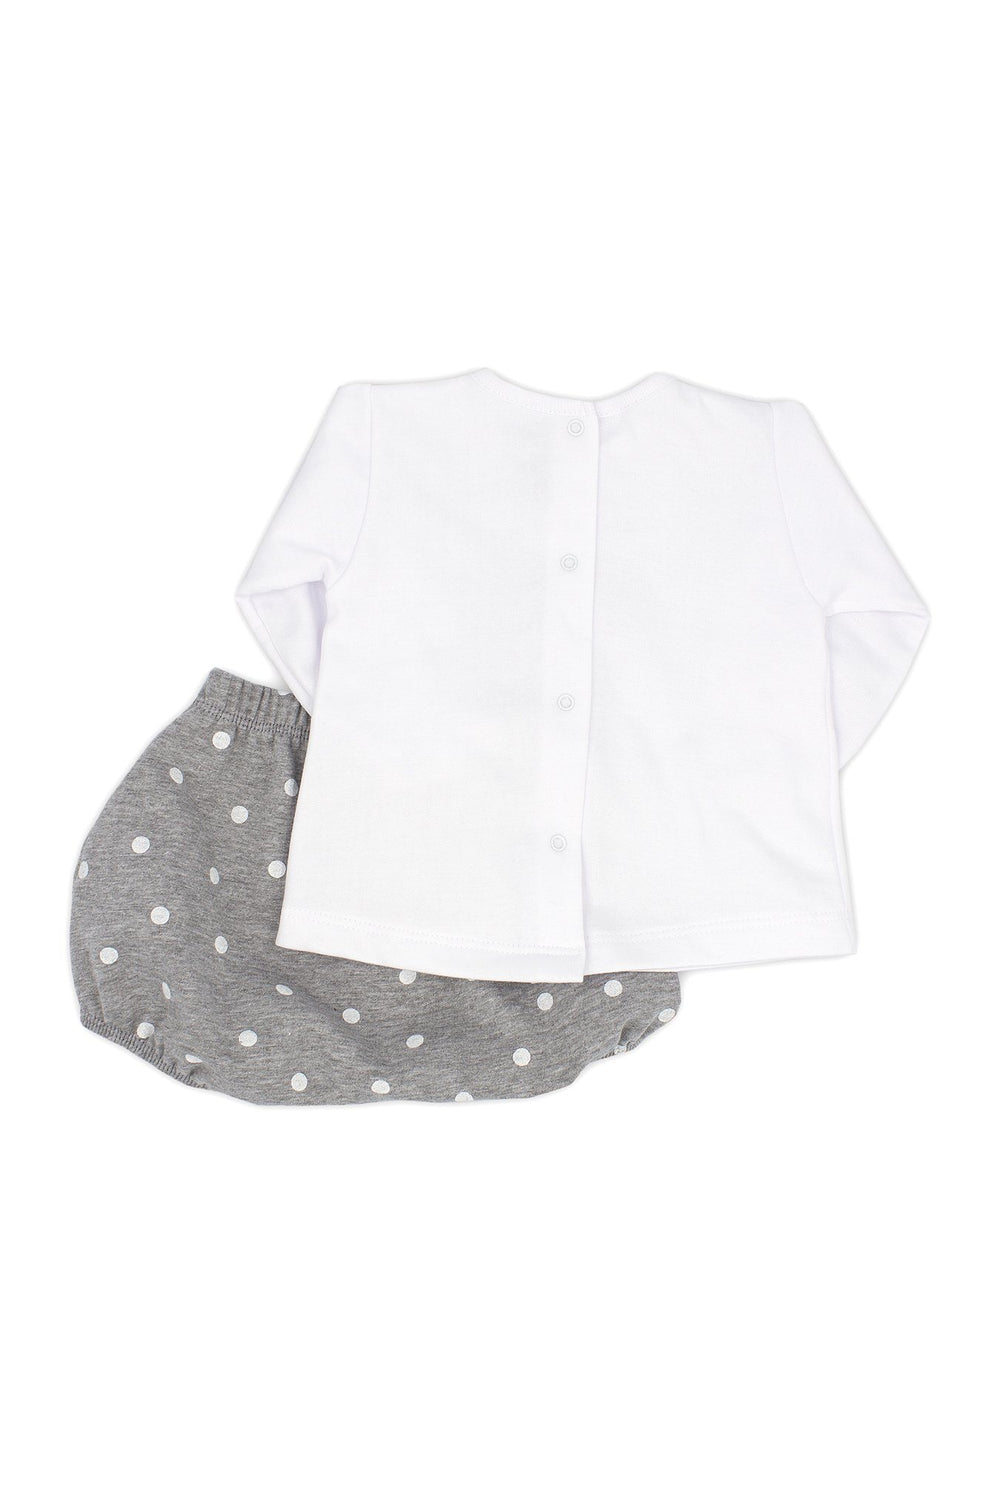 Rapife "Evangeline" White & Grey Heart Top & Bloomers | Millie and John